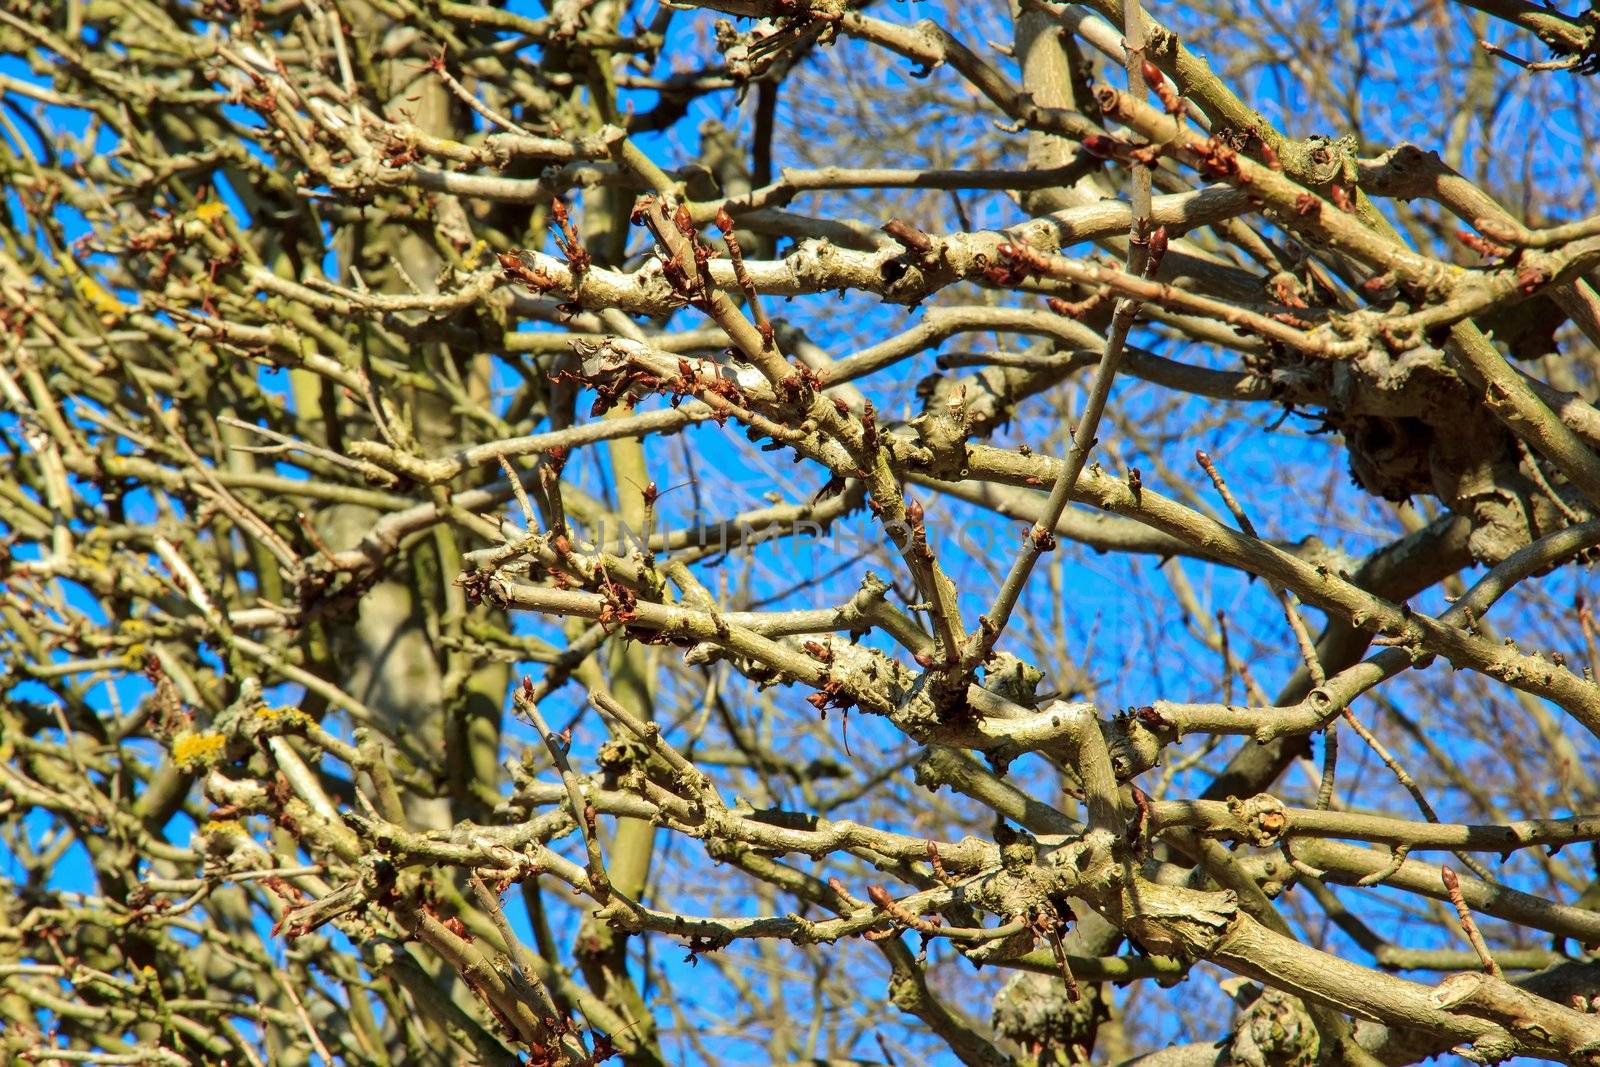 the end of winter, small shoots on the branches announce the arrival of spring